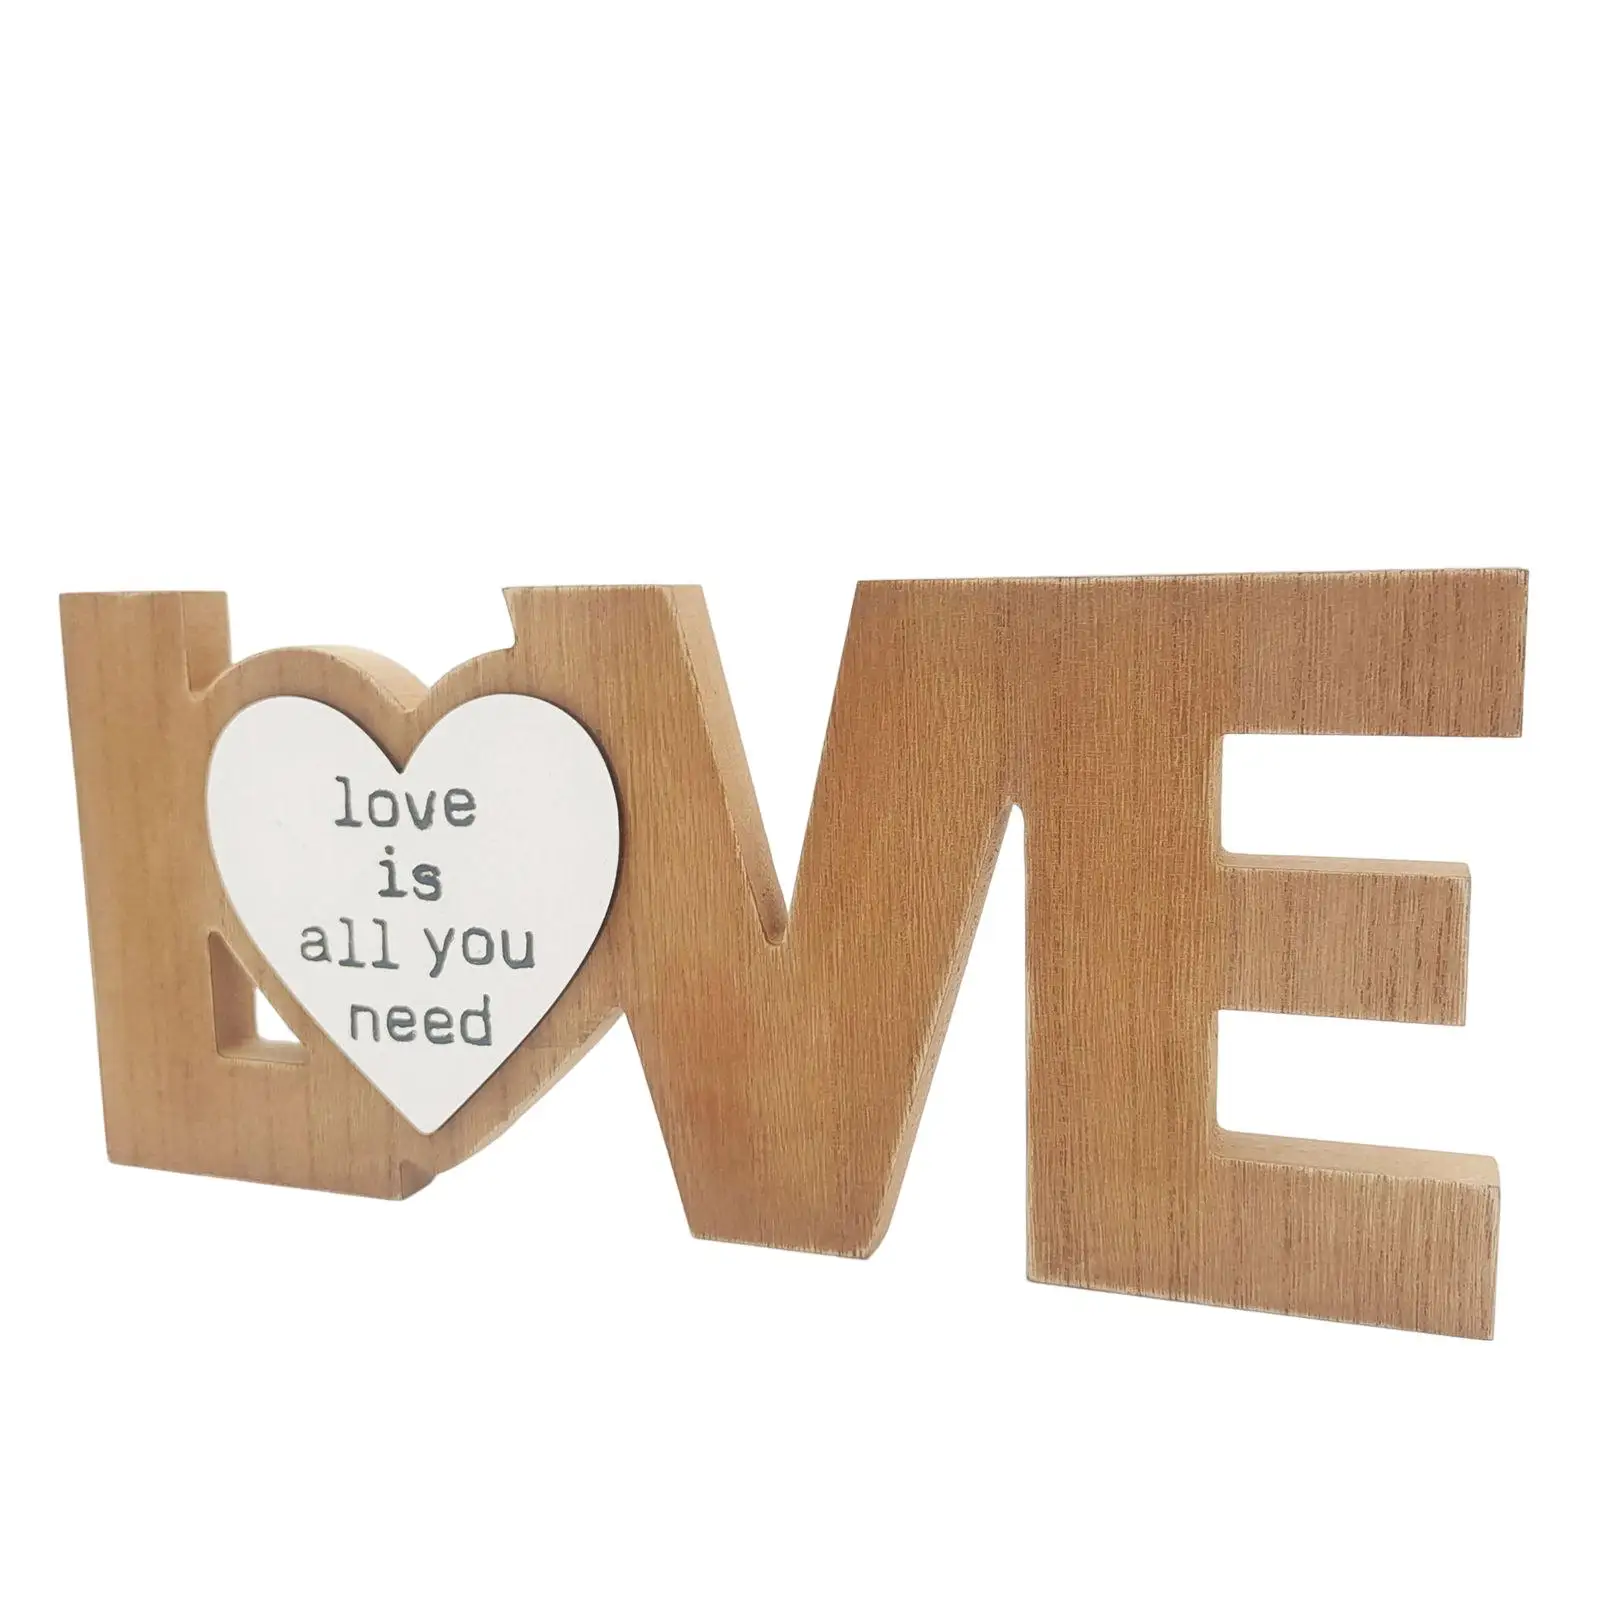 Wood Cutout Love Letters Sign Wedding Ornaments Accessory Housewarming Gift